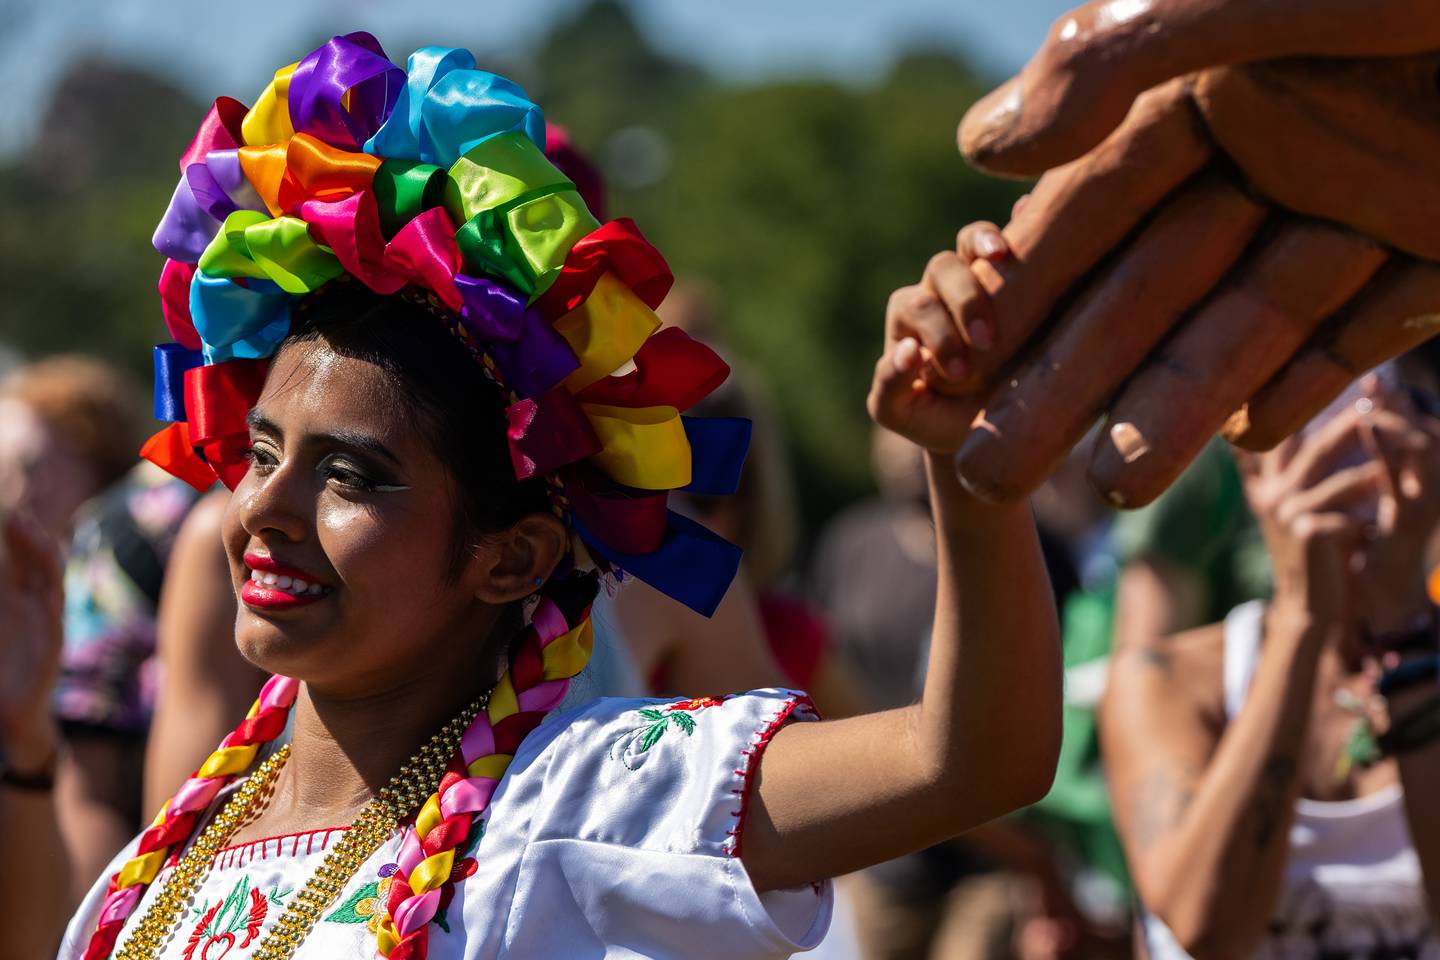 Lele, a Mexican dancer in a rainbow headdress and a marigold necklace, holds Amal's hand.